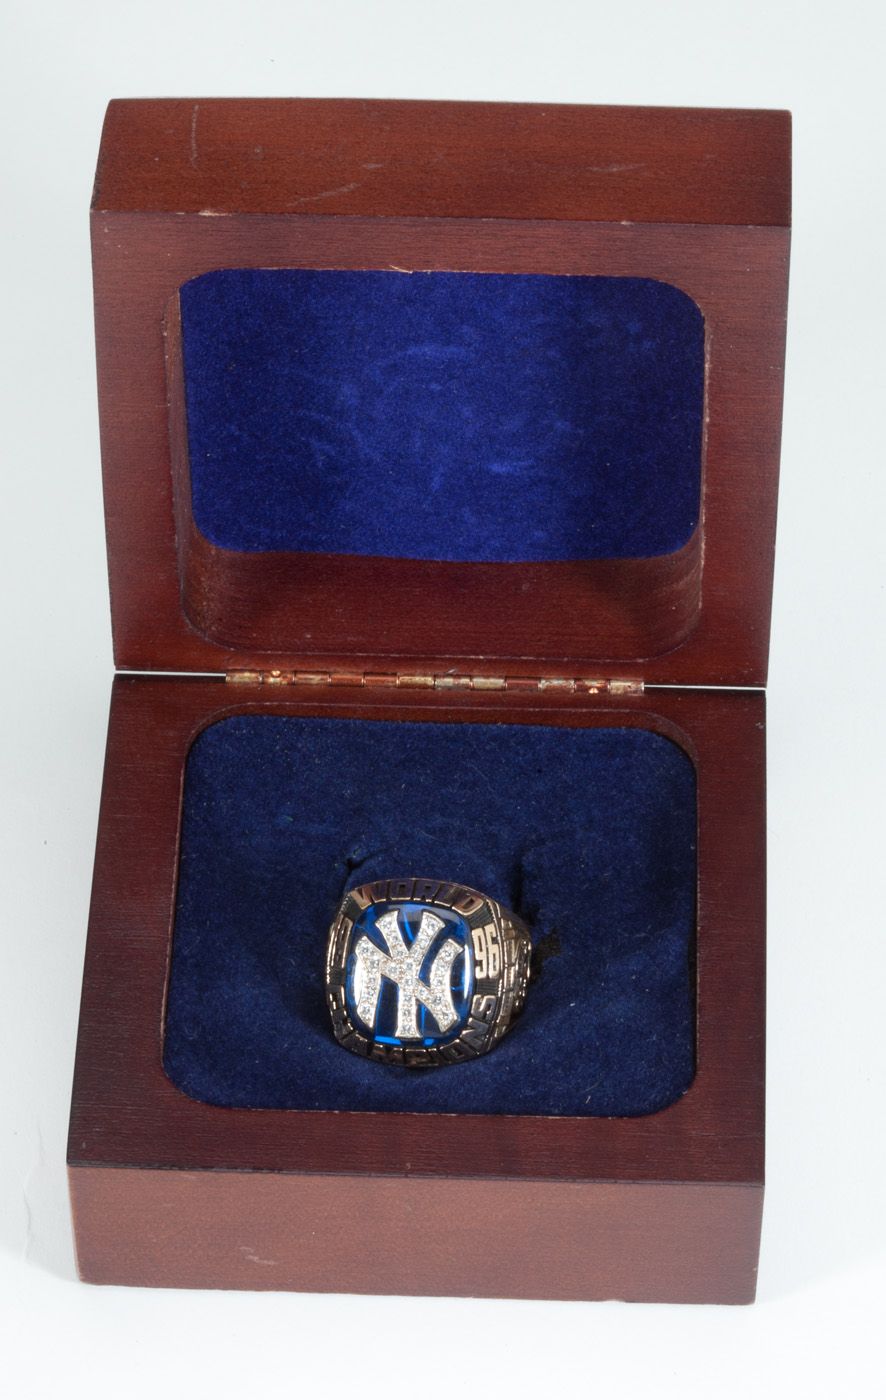 1996 New York Yankees World Championship Ring Presented to Don, Lot #80127